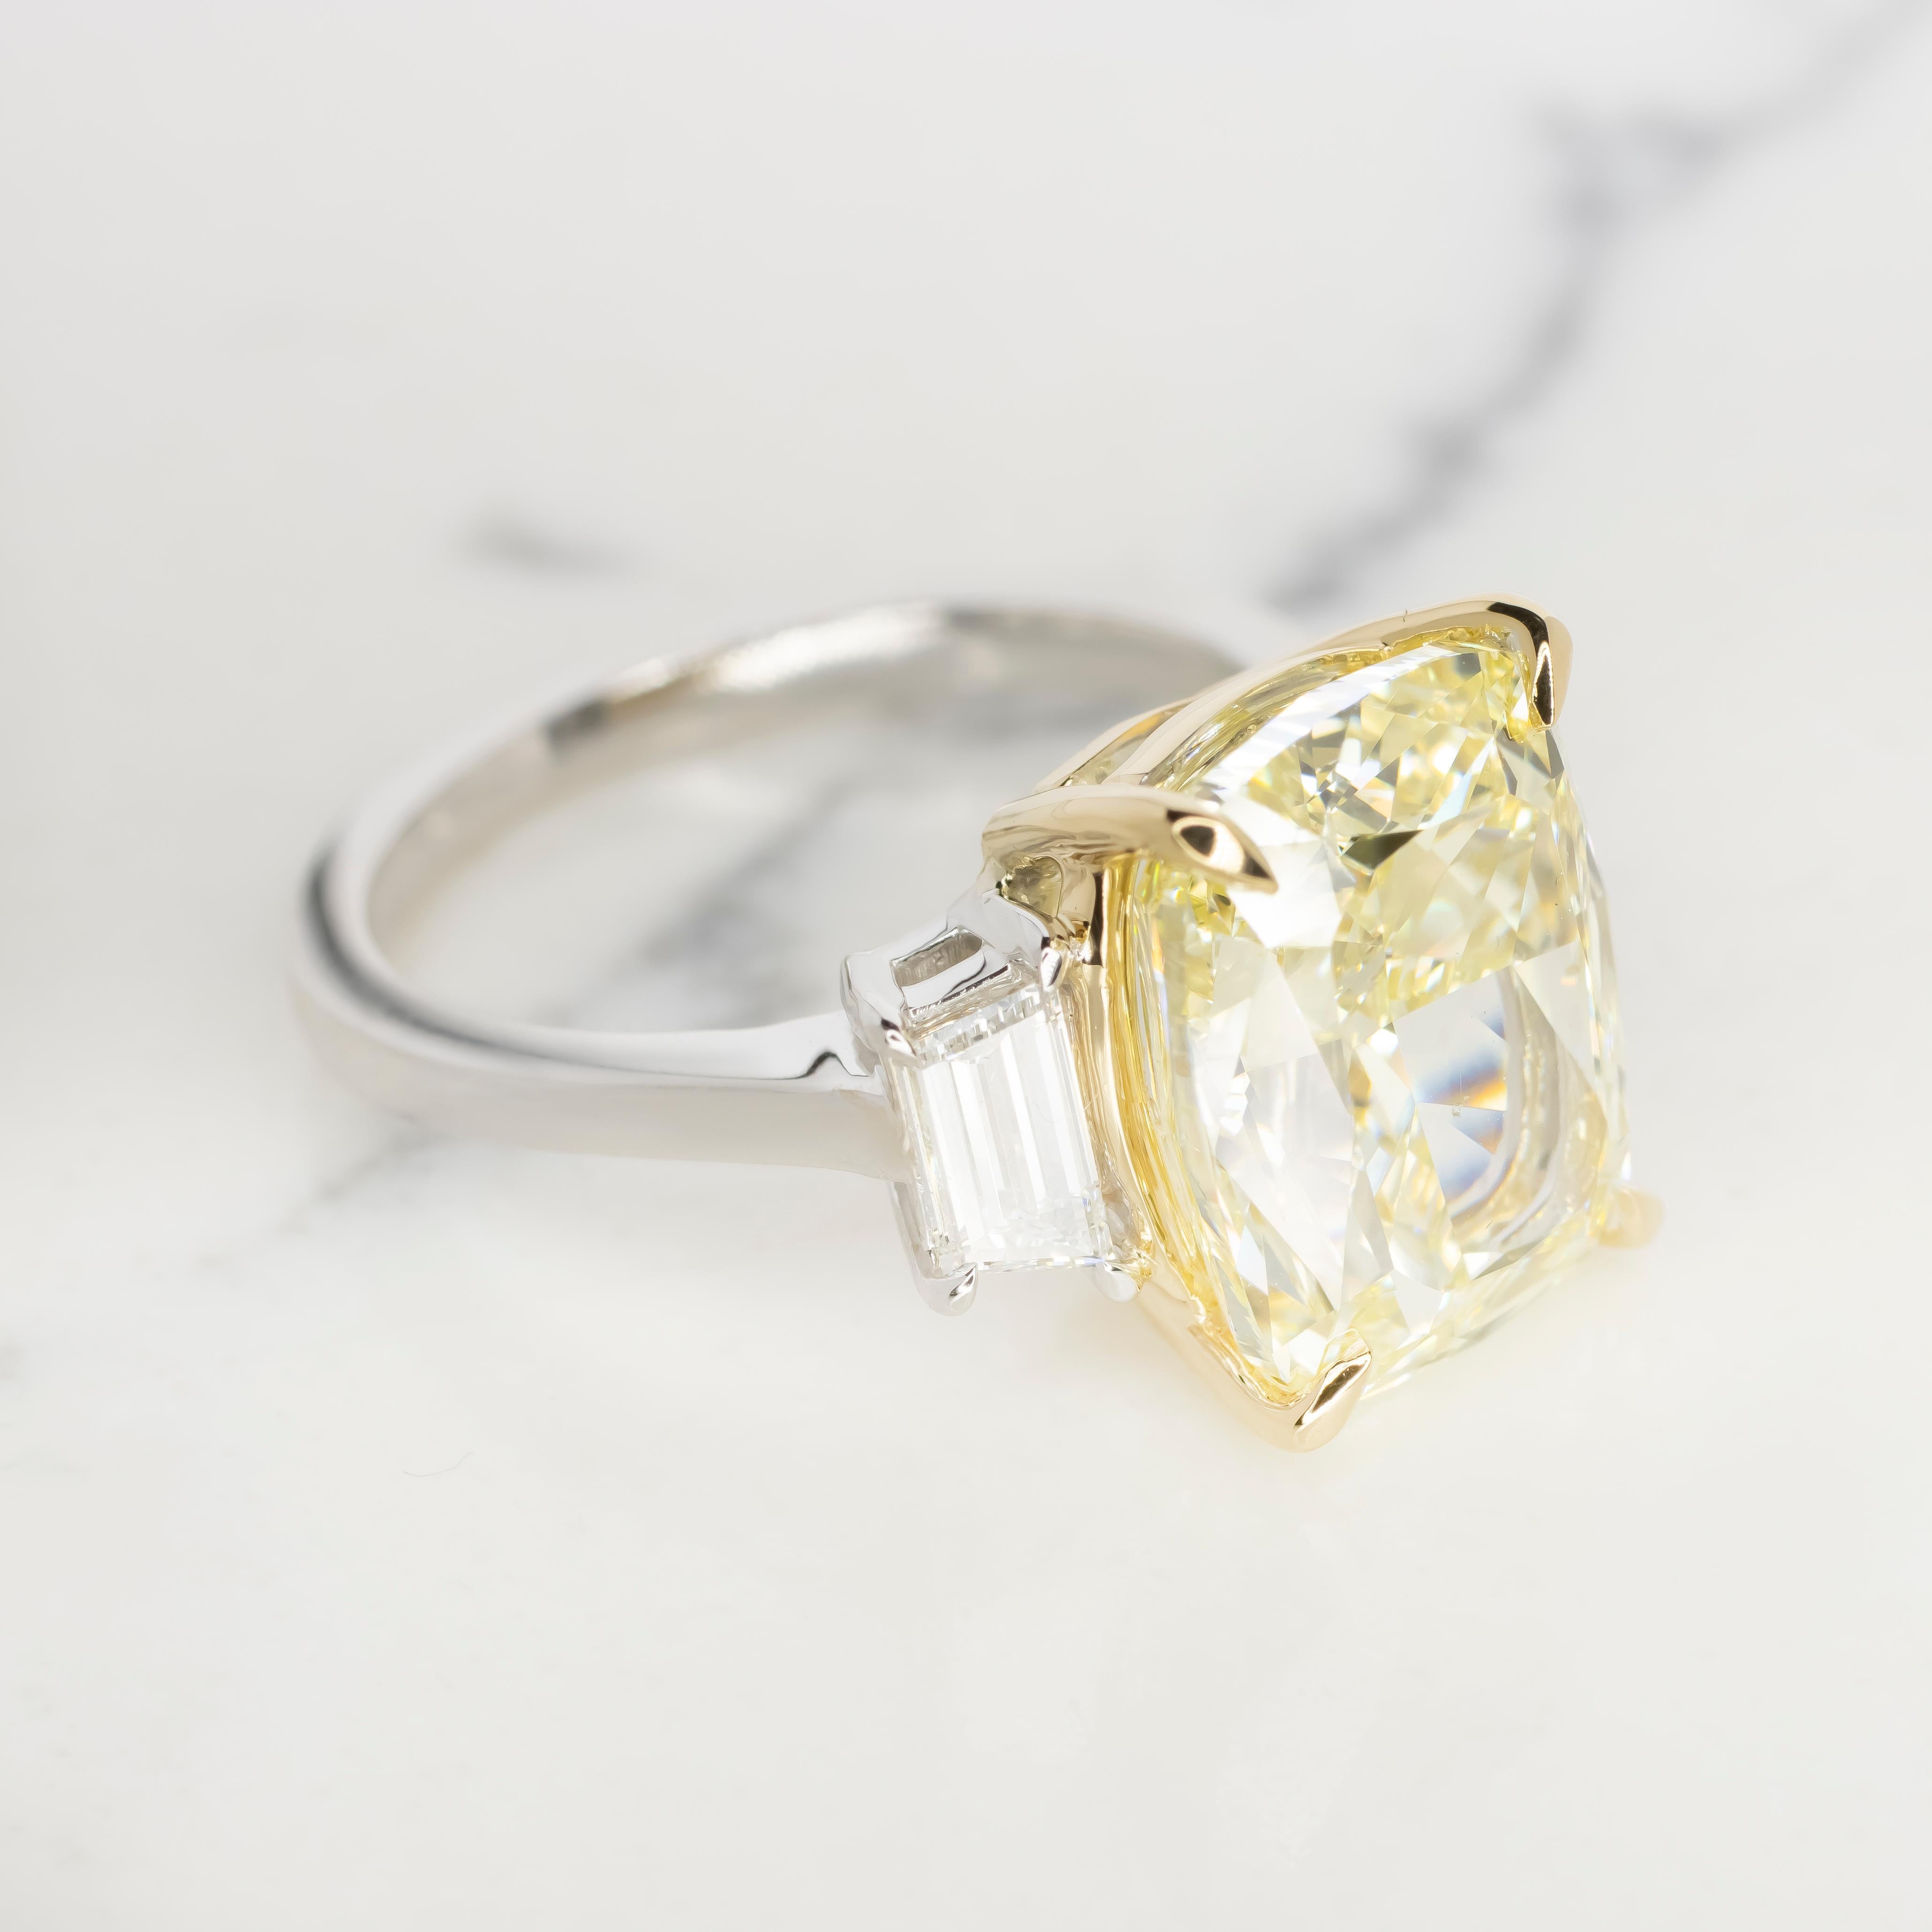 Introducing the breathtaking GIA Certified 12.34 Carat Fancy Light Yellow Cushion Cut Diamond Ring, a true symbol of luxury and elegance. At its center dazzles a magnificent cushion-cut diamond, certified by the esteemed Gemological Institute of